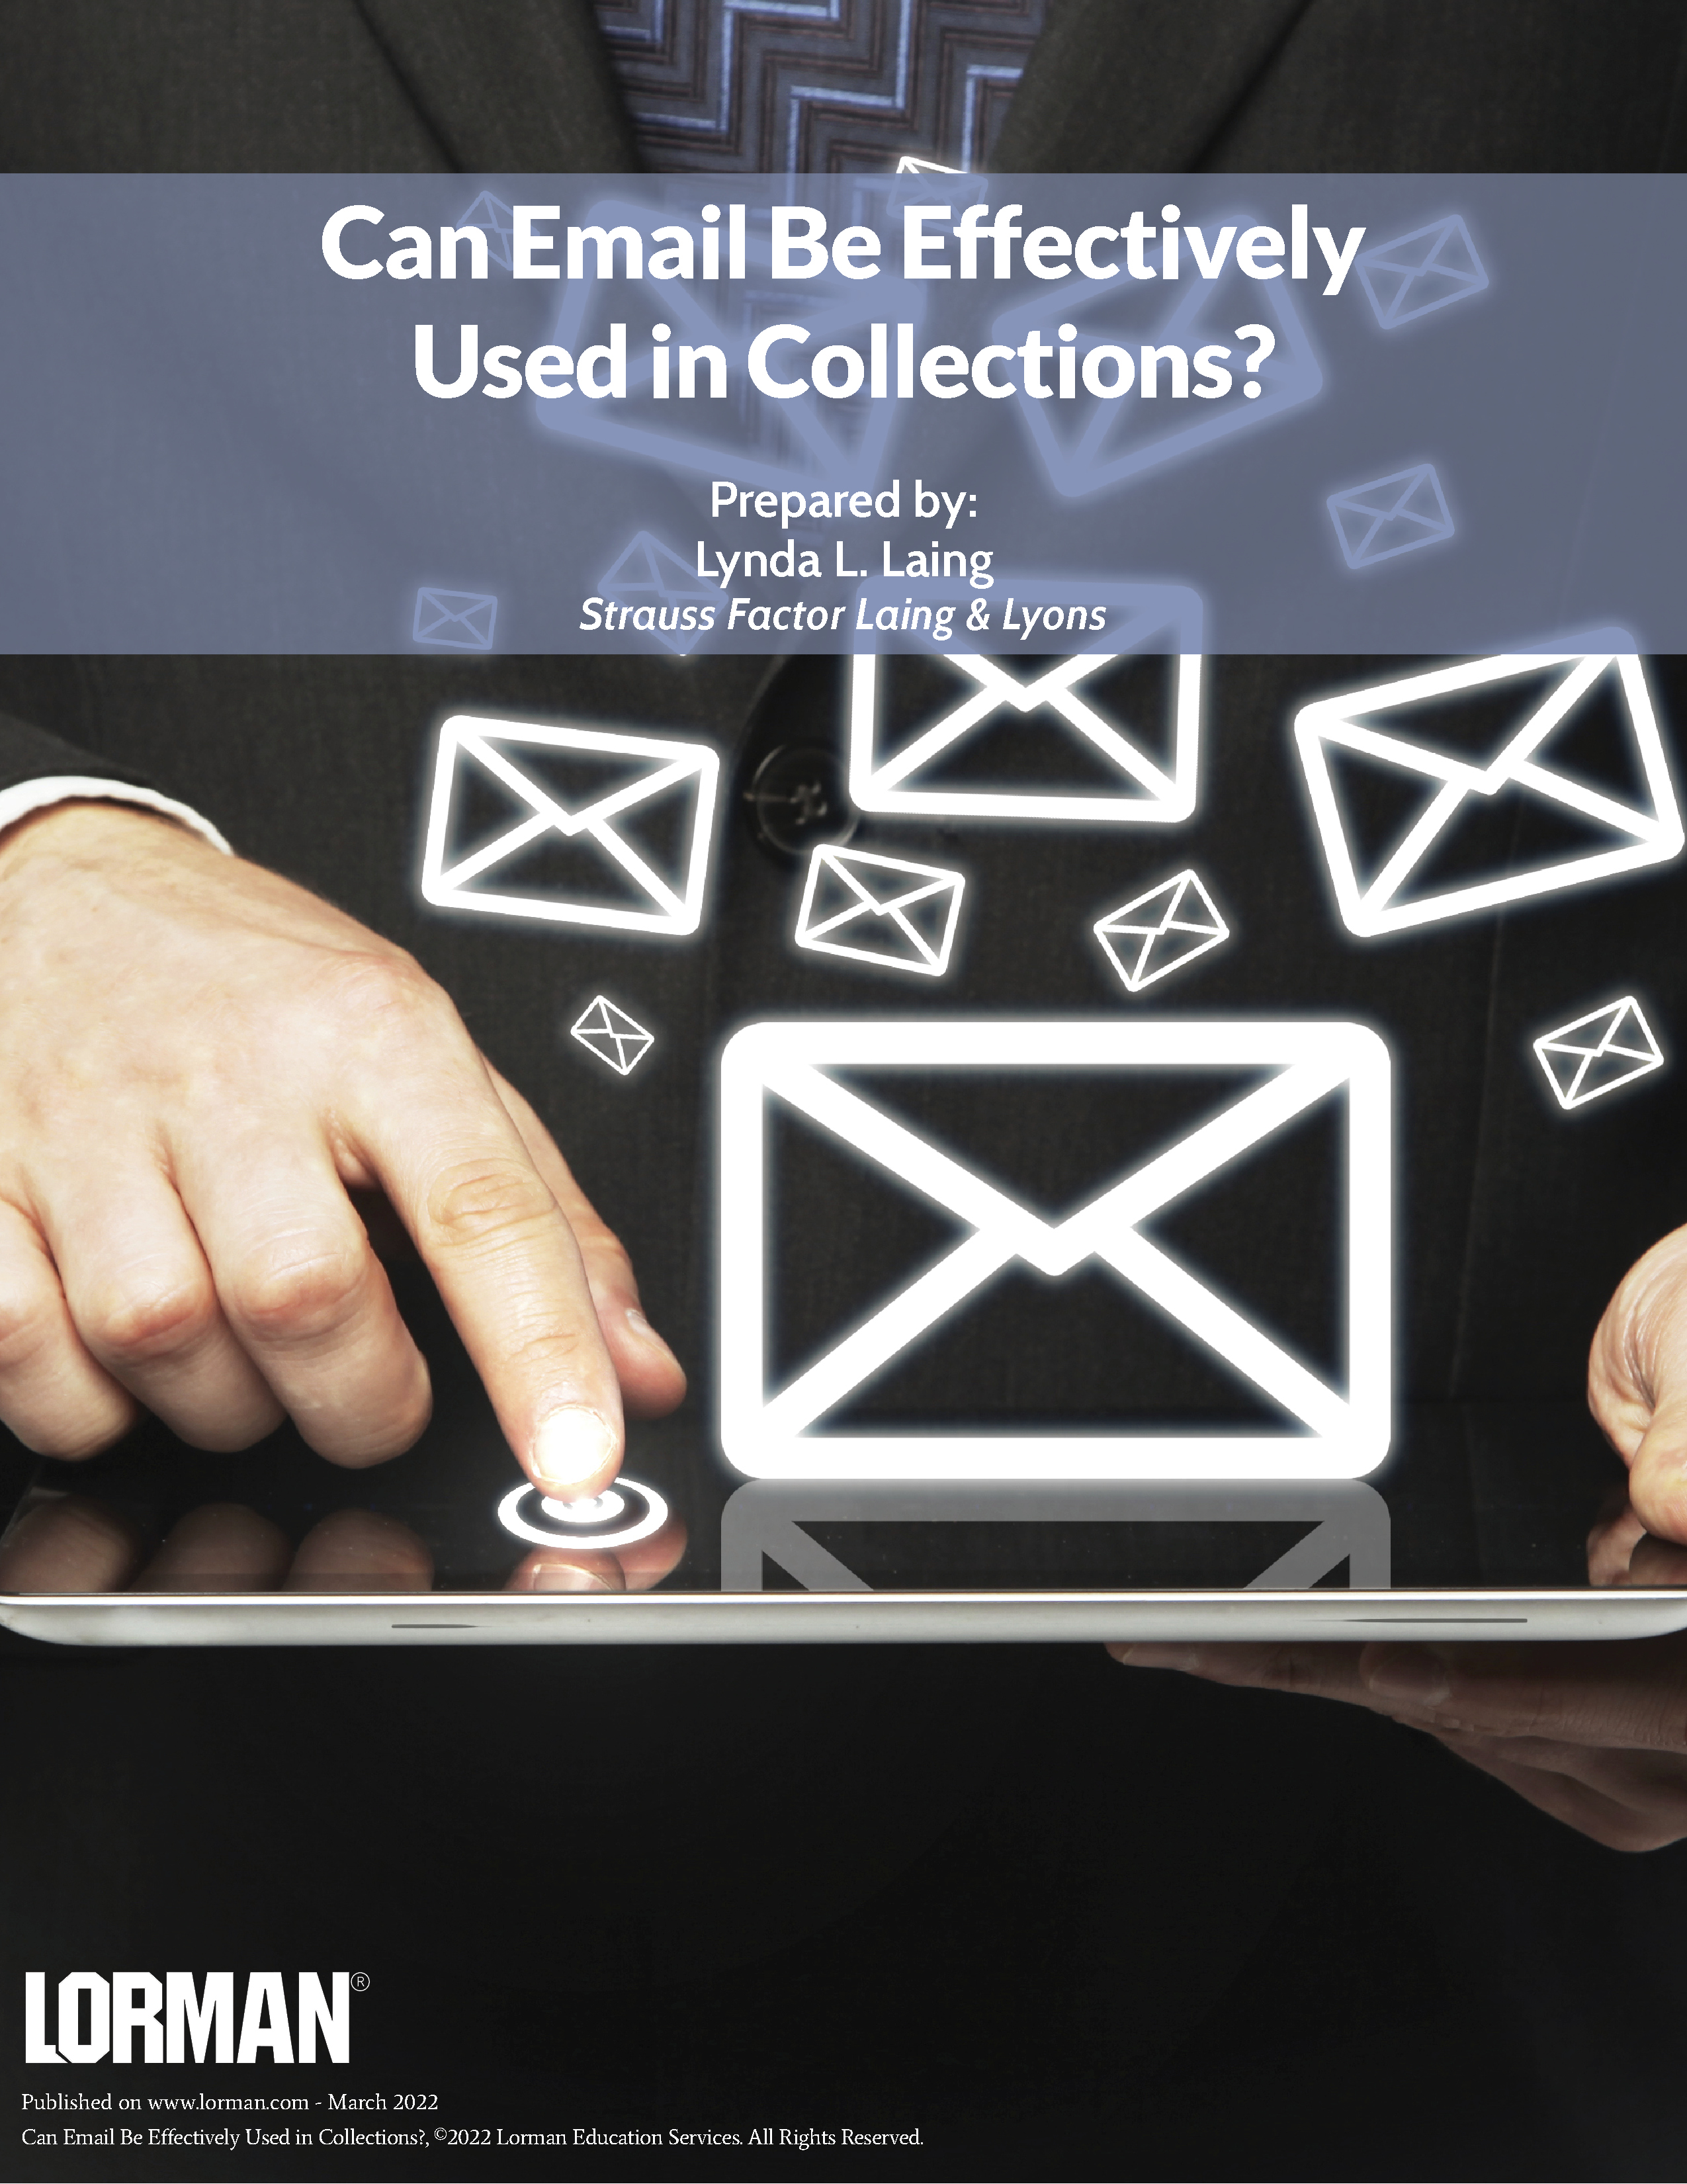 Can Email Be Effectively Used in Collections?